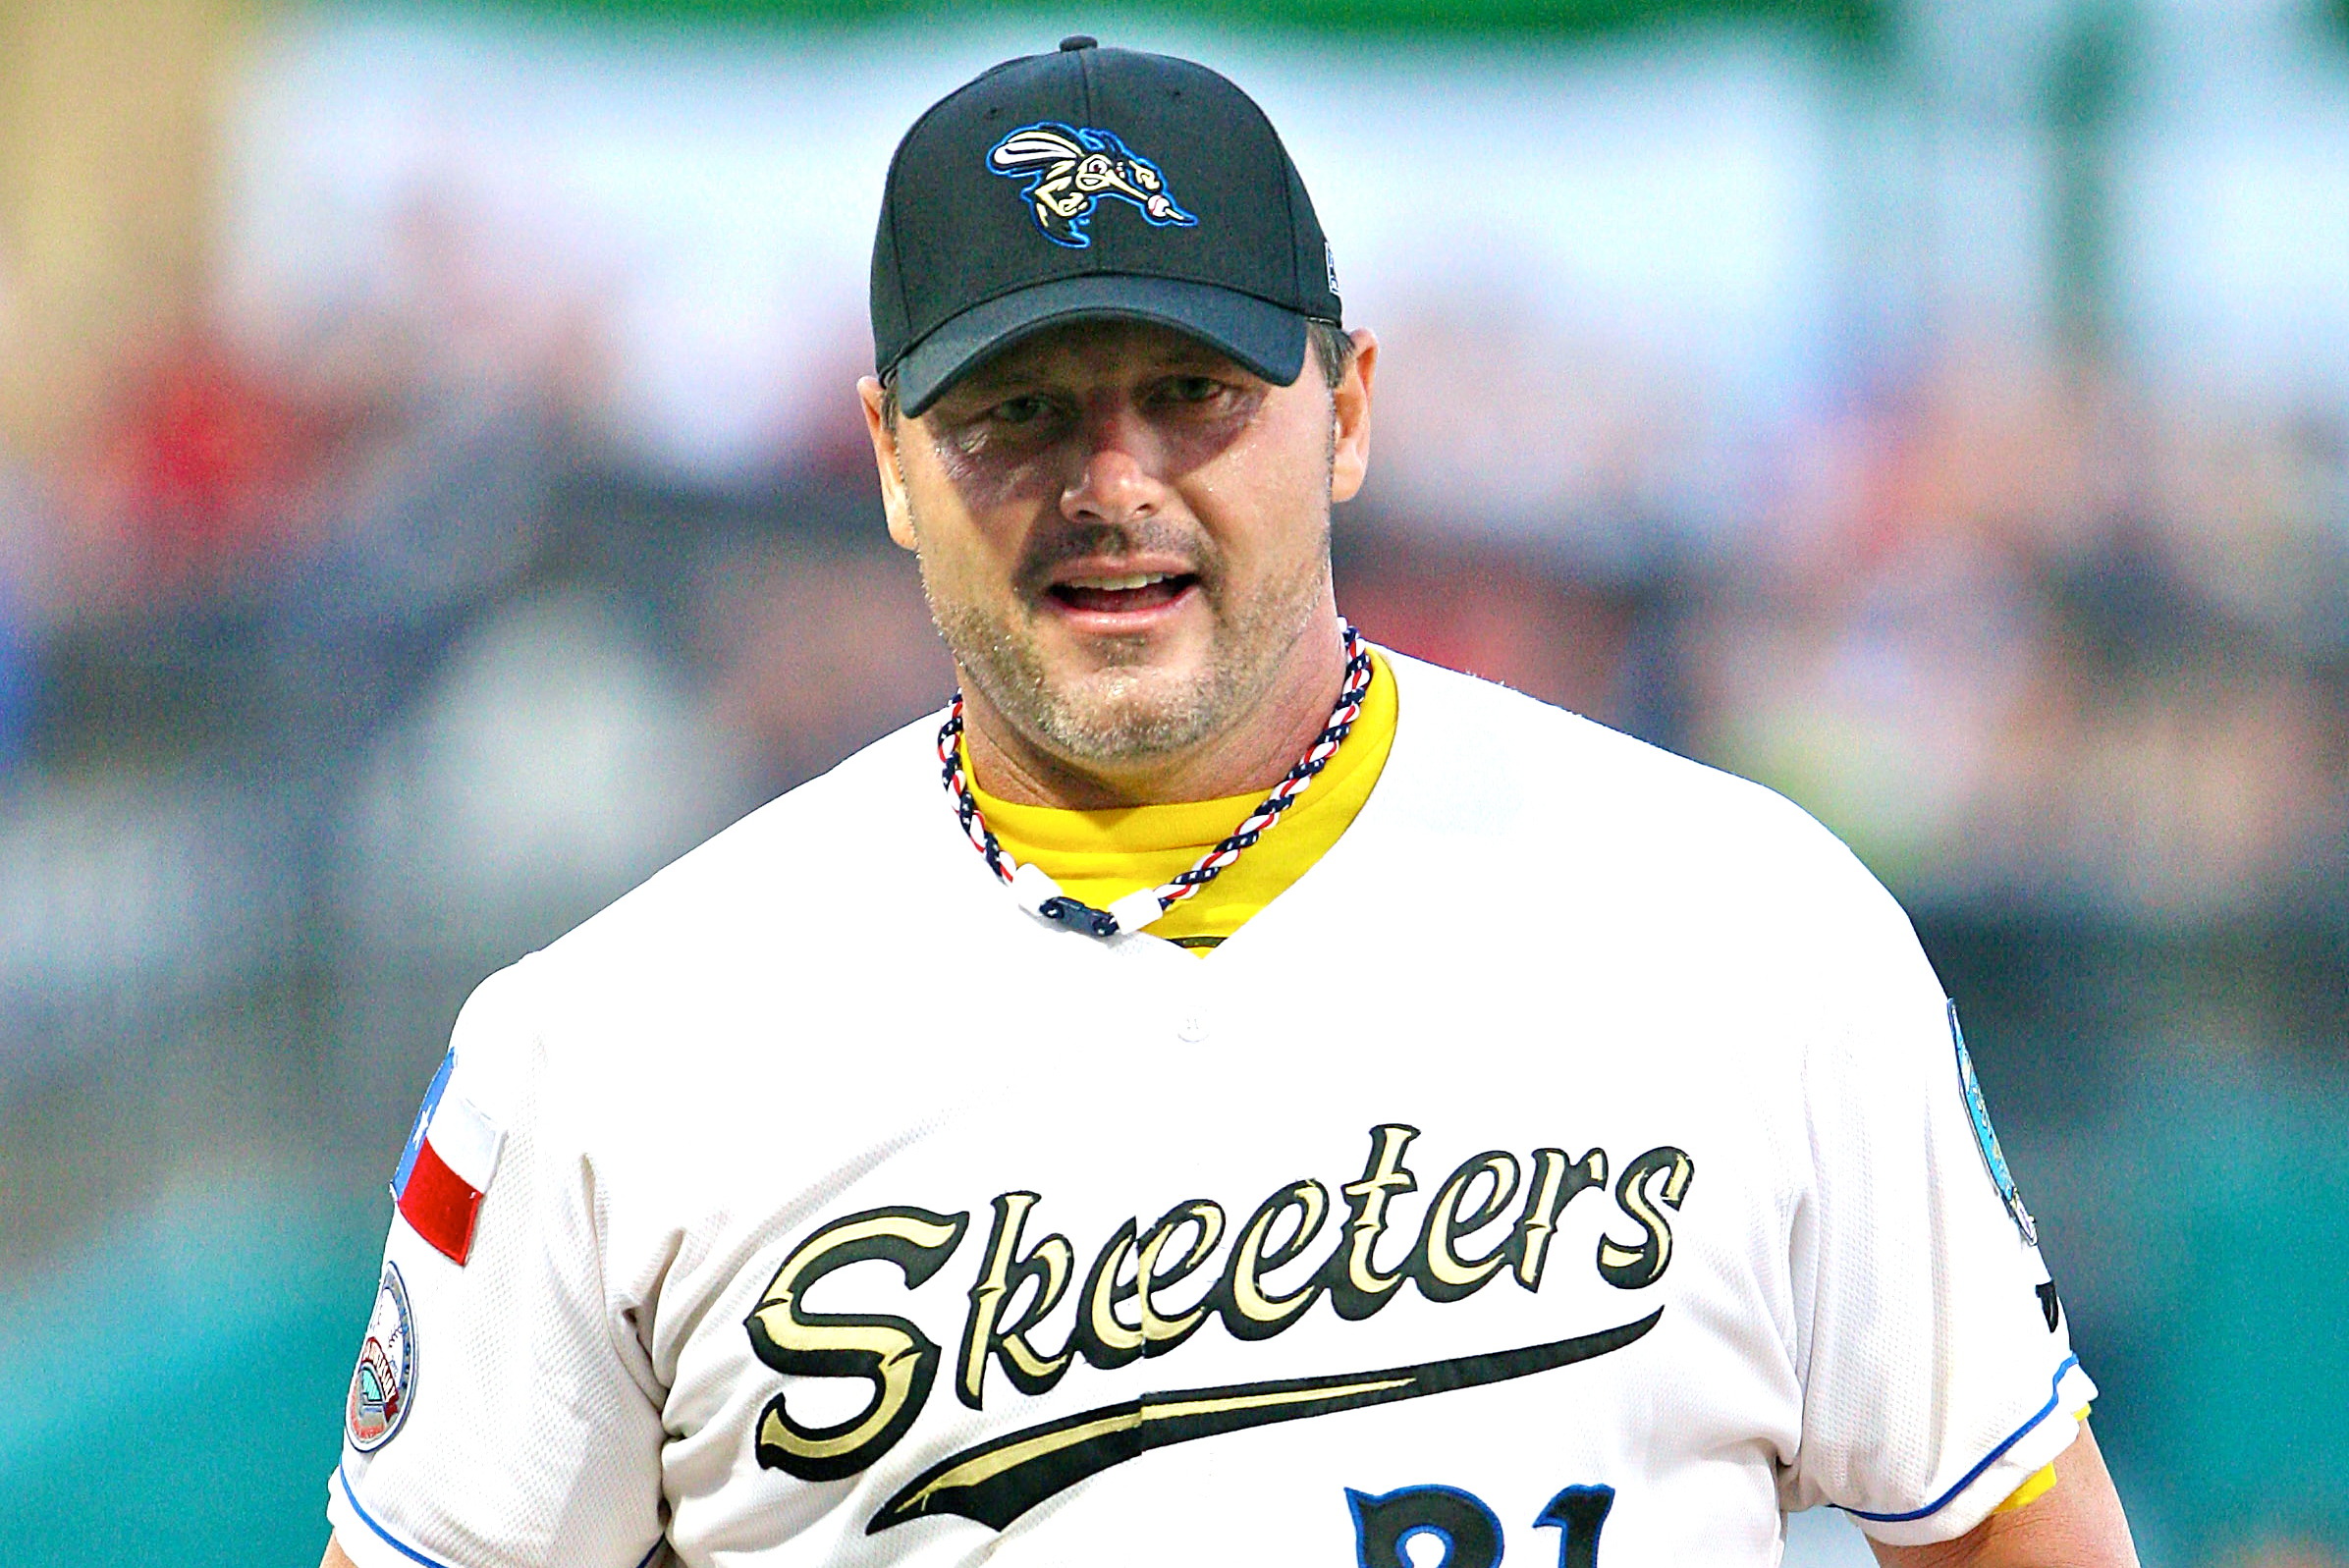 CATCHING UP WITH LEGENDARY PITCHER ROGER CLEMENS